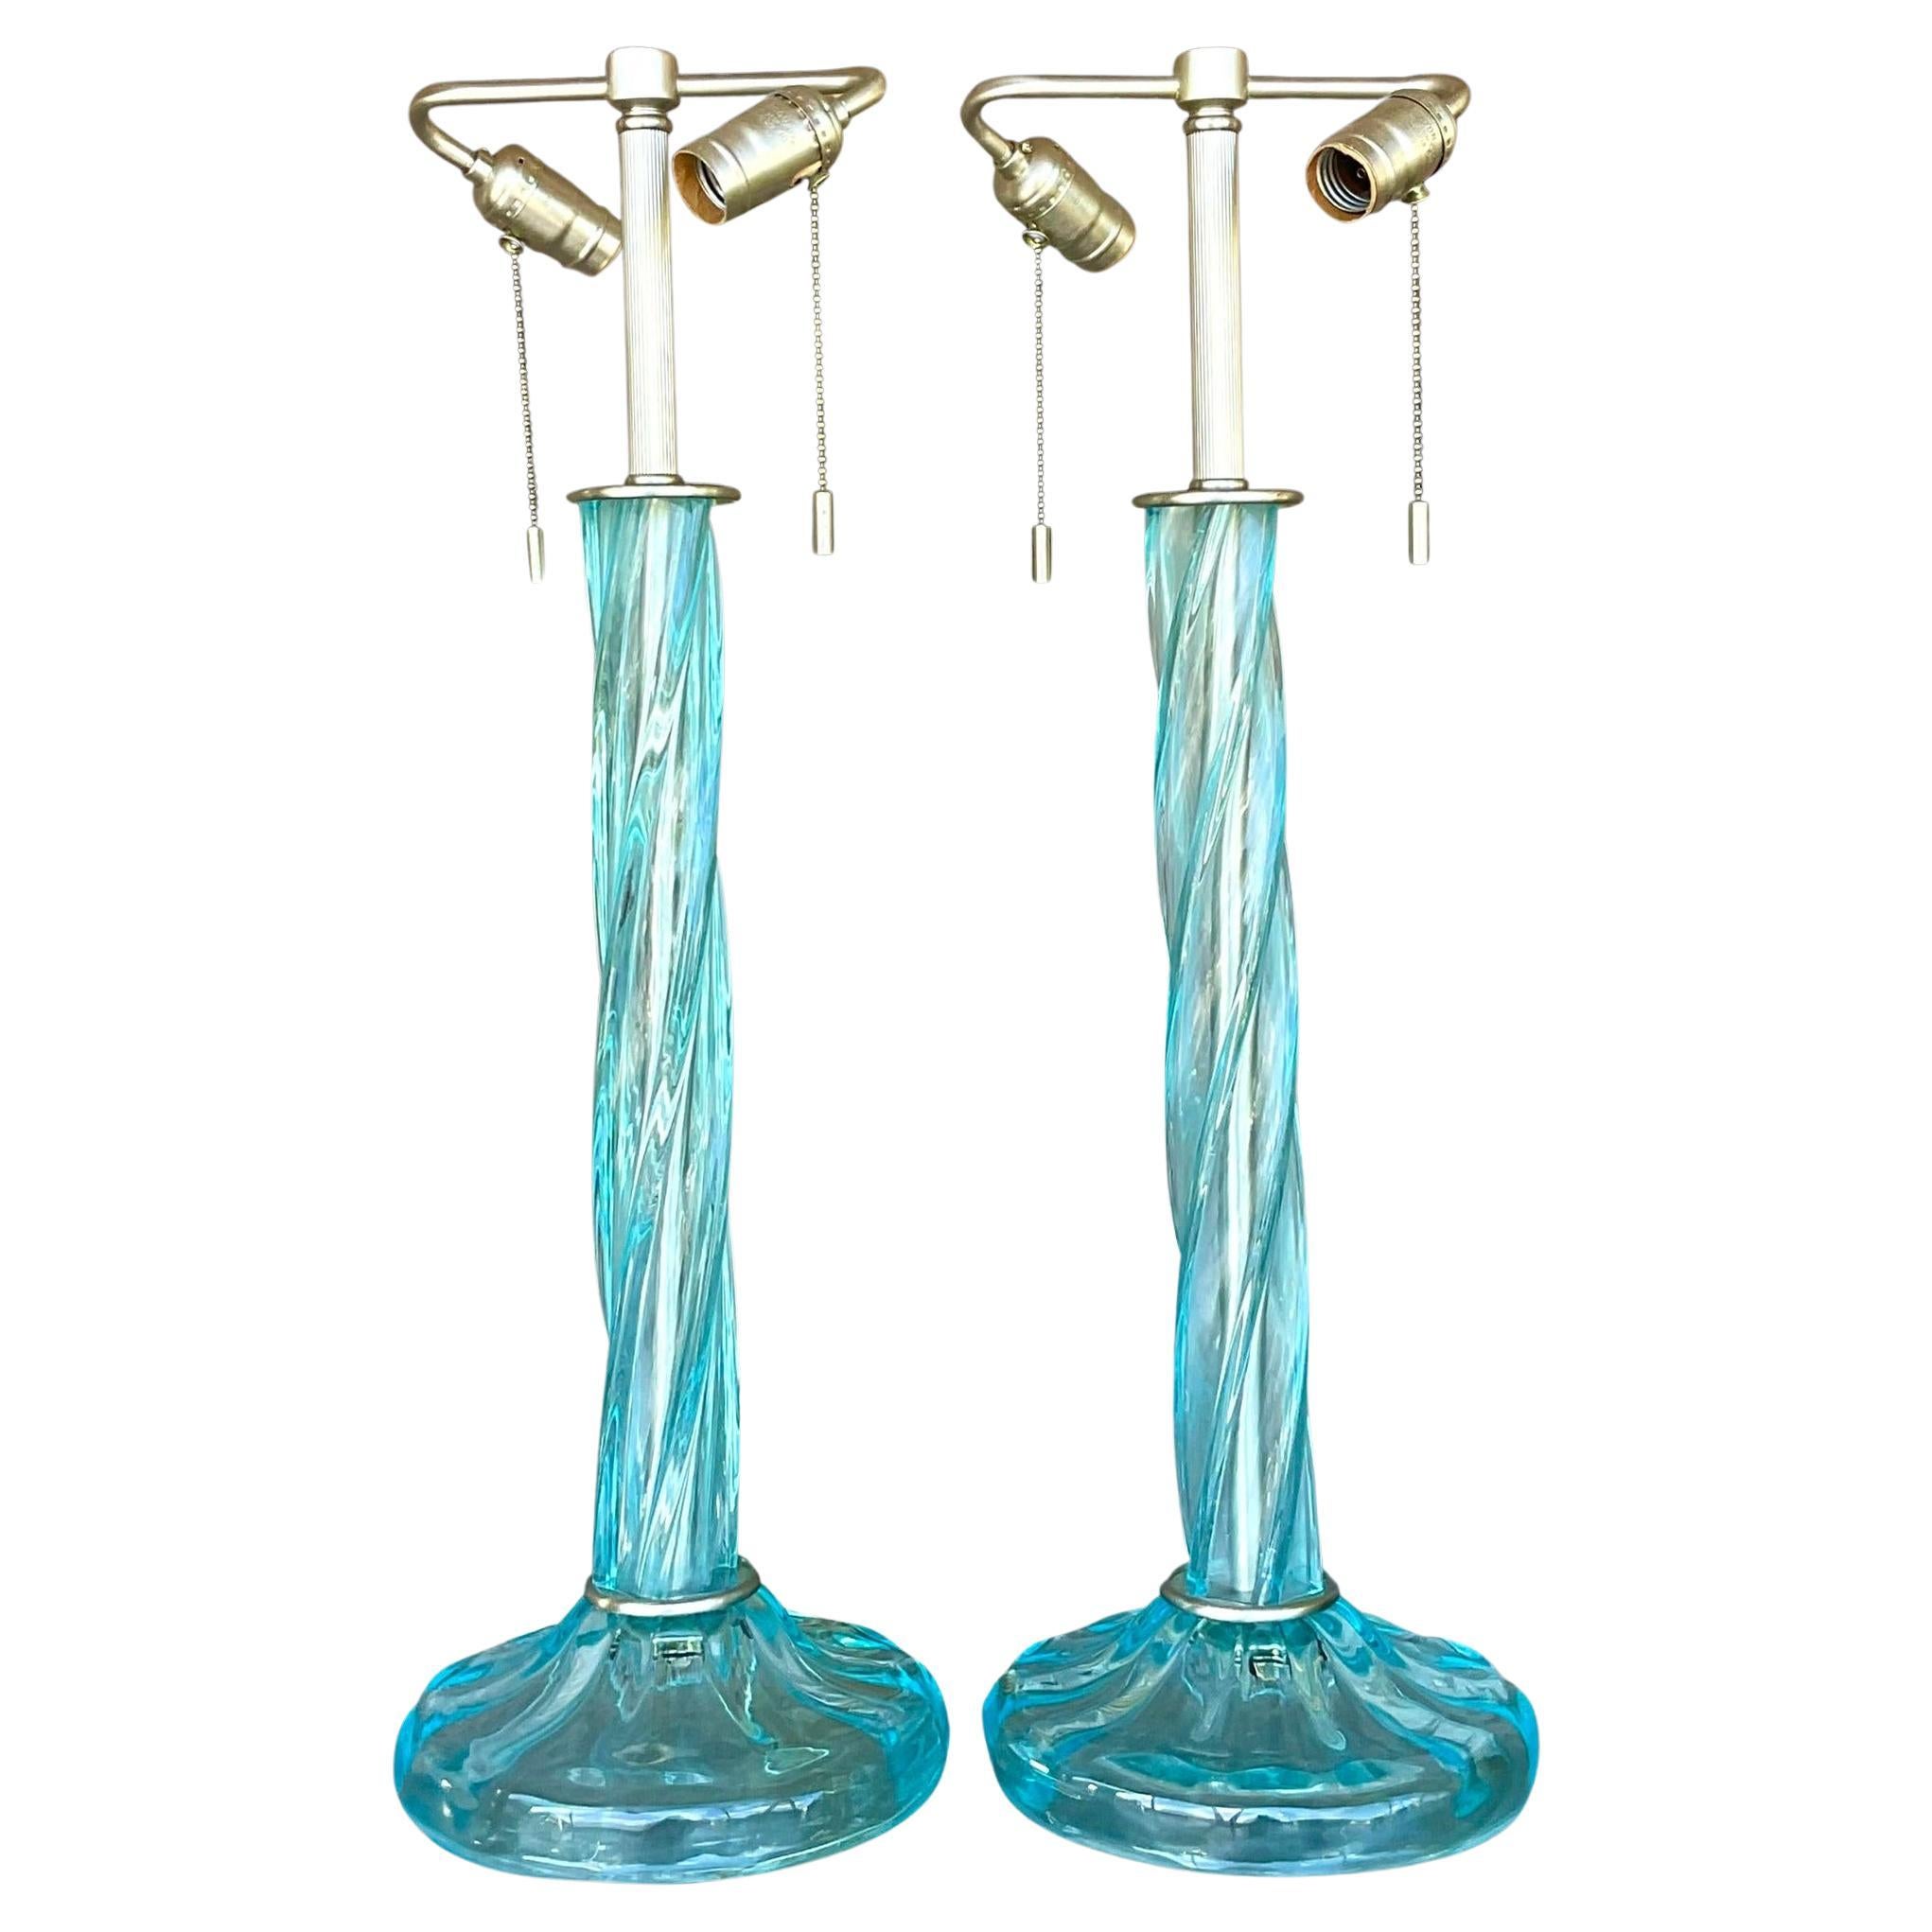 Vintage Boho Signed Donghia Twist Blown Glass Lamps - a Pair